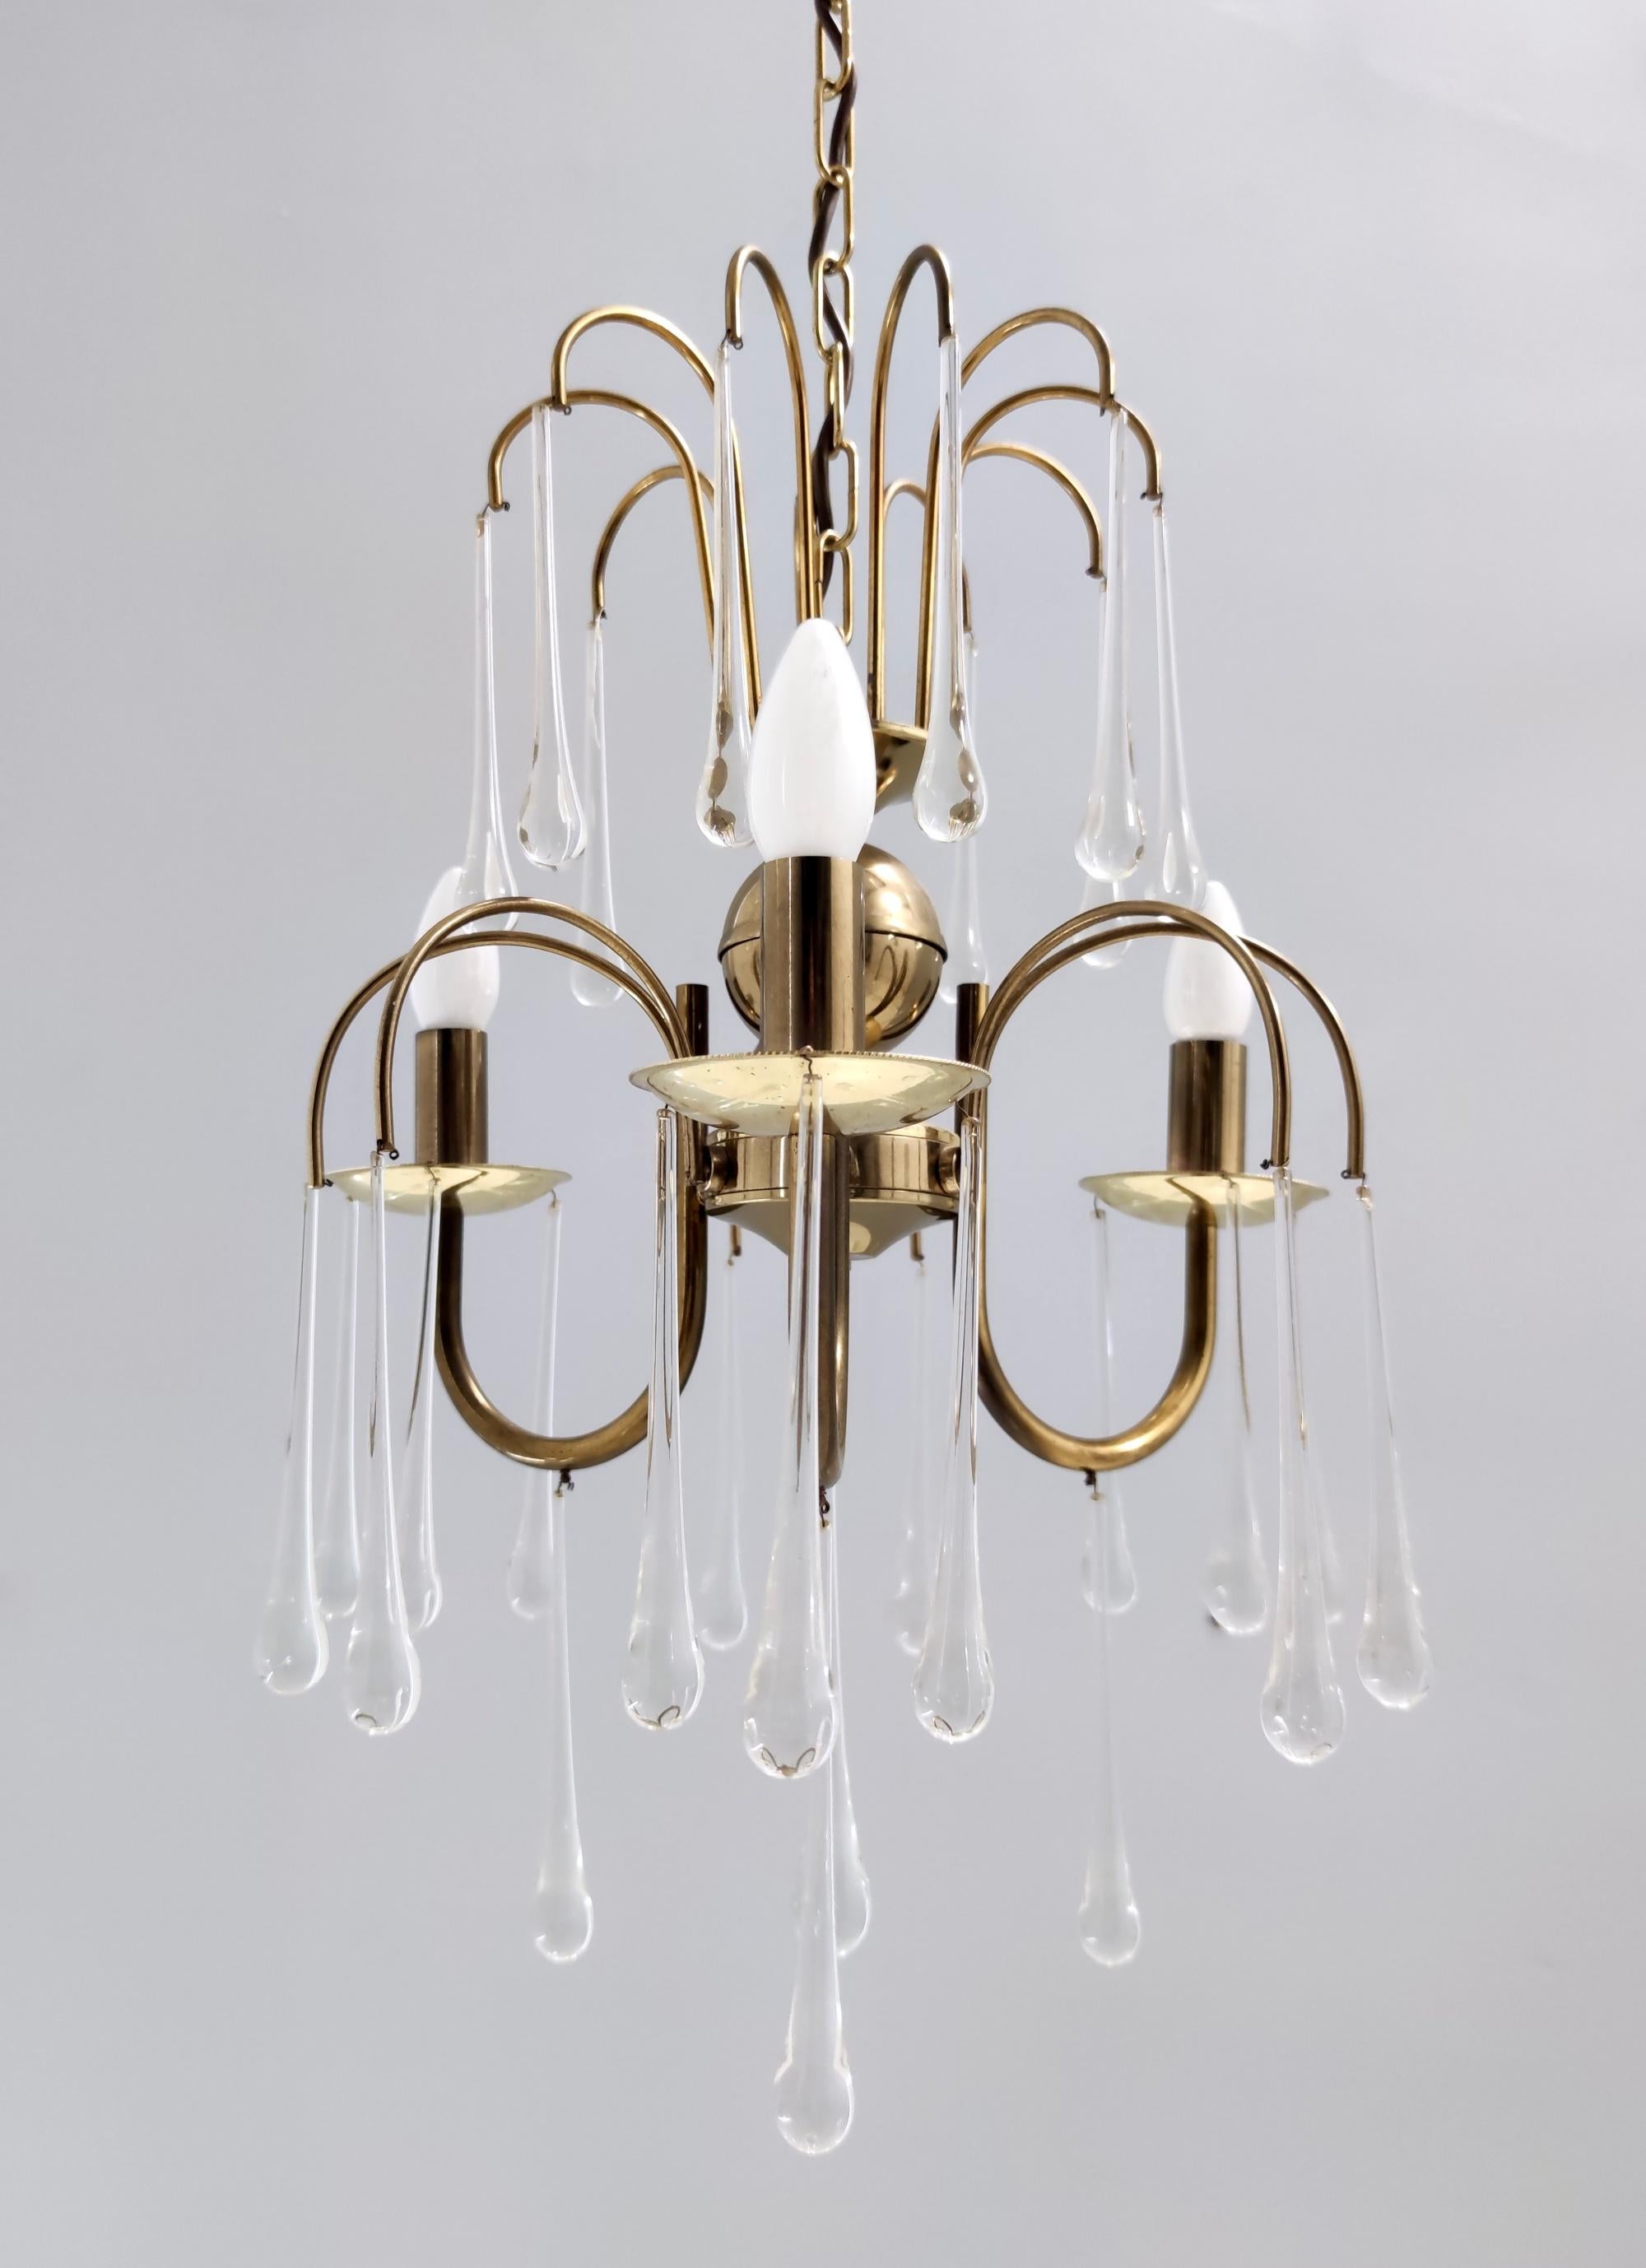 Postmodern Murano Glass Teardrop Chandelier in the Style of Venini, Italy In Excellent Condition For Sale In Bresso, Lombardy